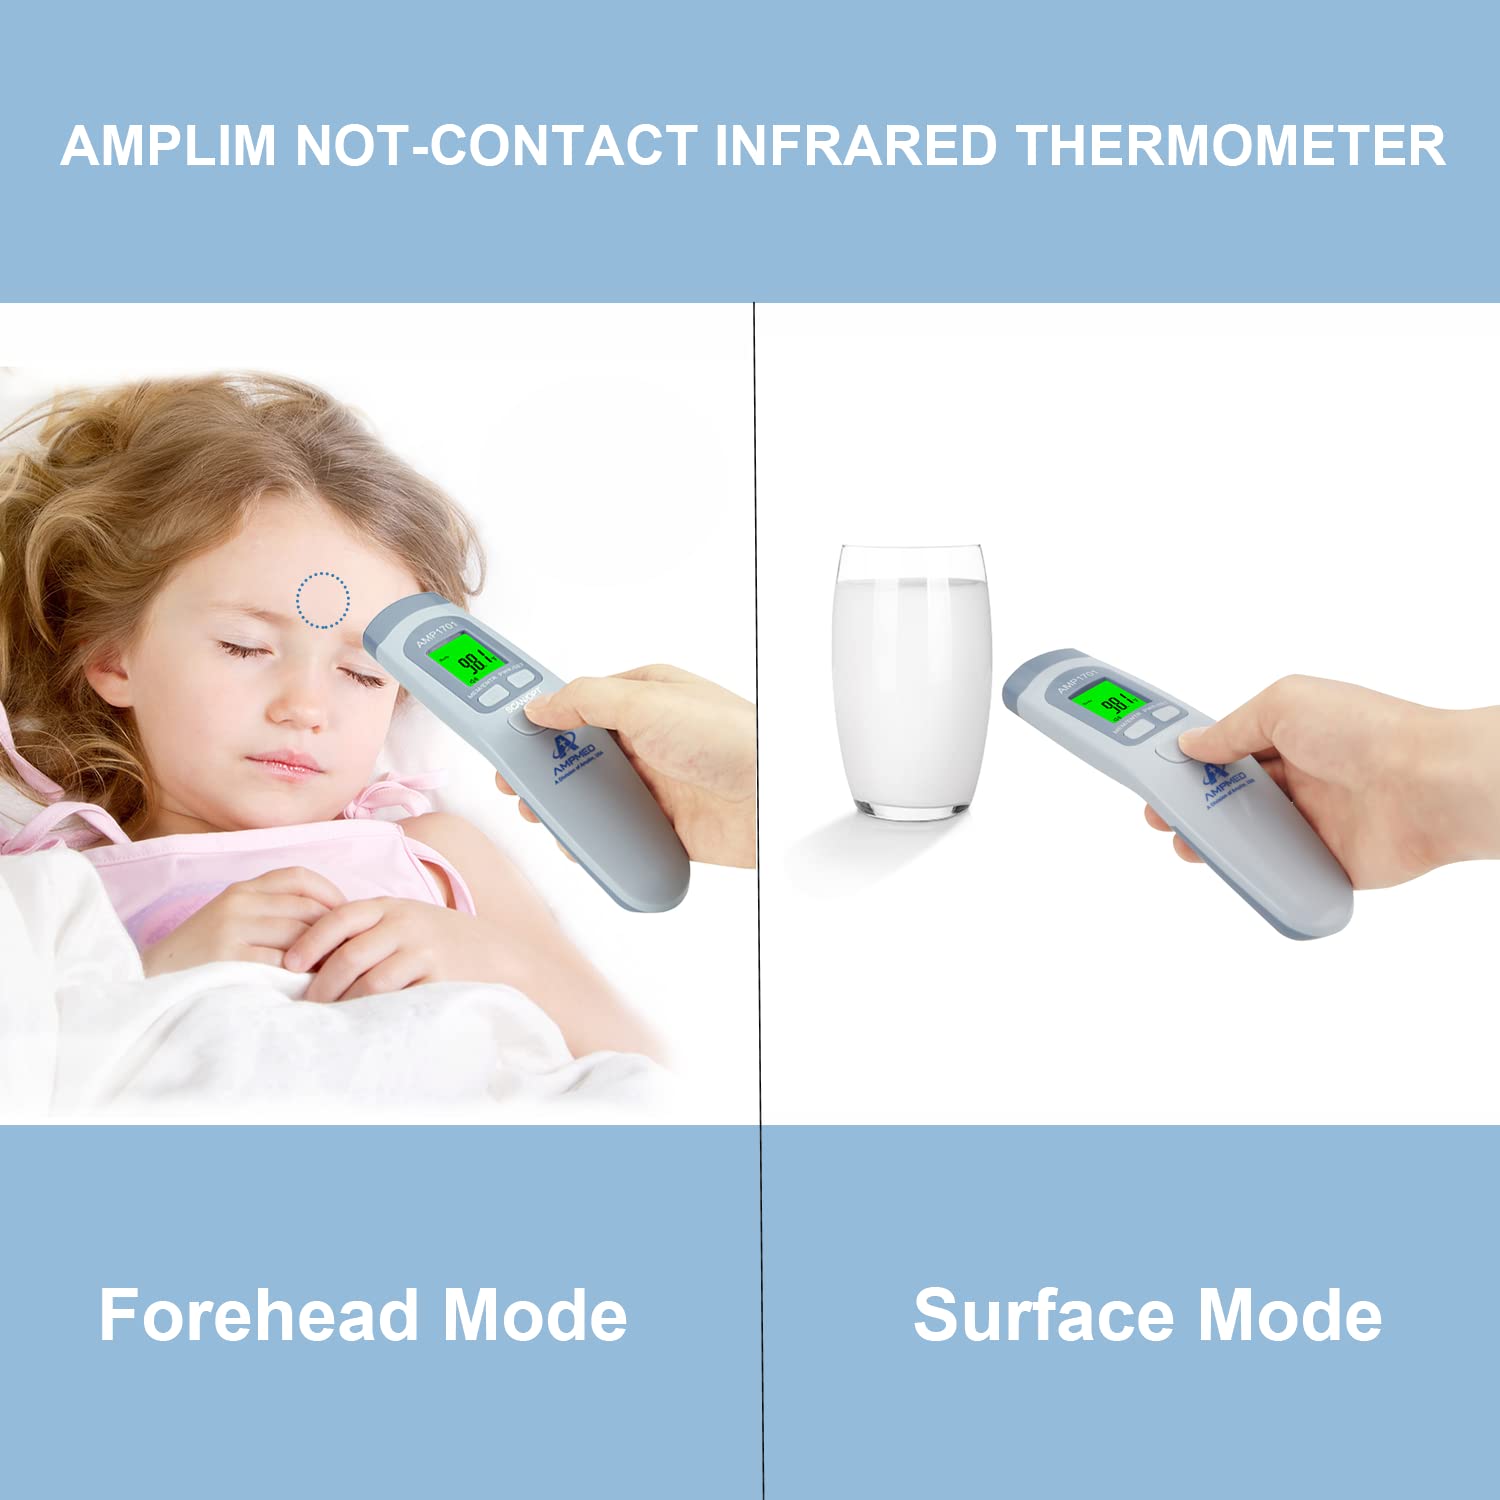 Amplim CA1 and F1 Infrared Thermometer Bundle - Non Contact Digital Forehead Thermometer for Adults, Kids, Baby Head Fever. Contactless, Touchless, No Touch, Instant Read IR Temporal/Ear Temperature